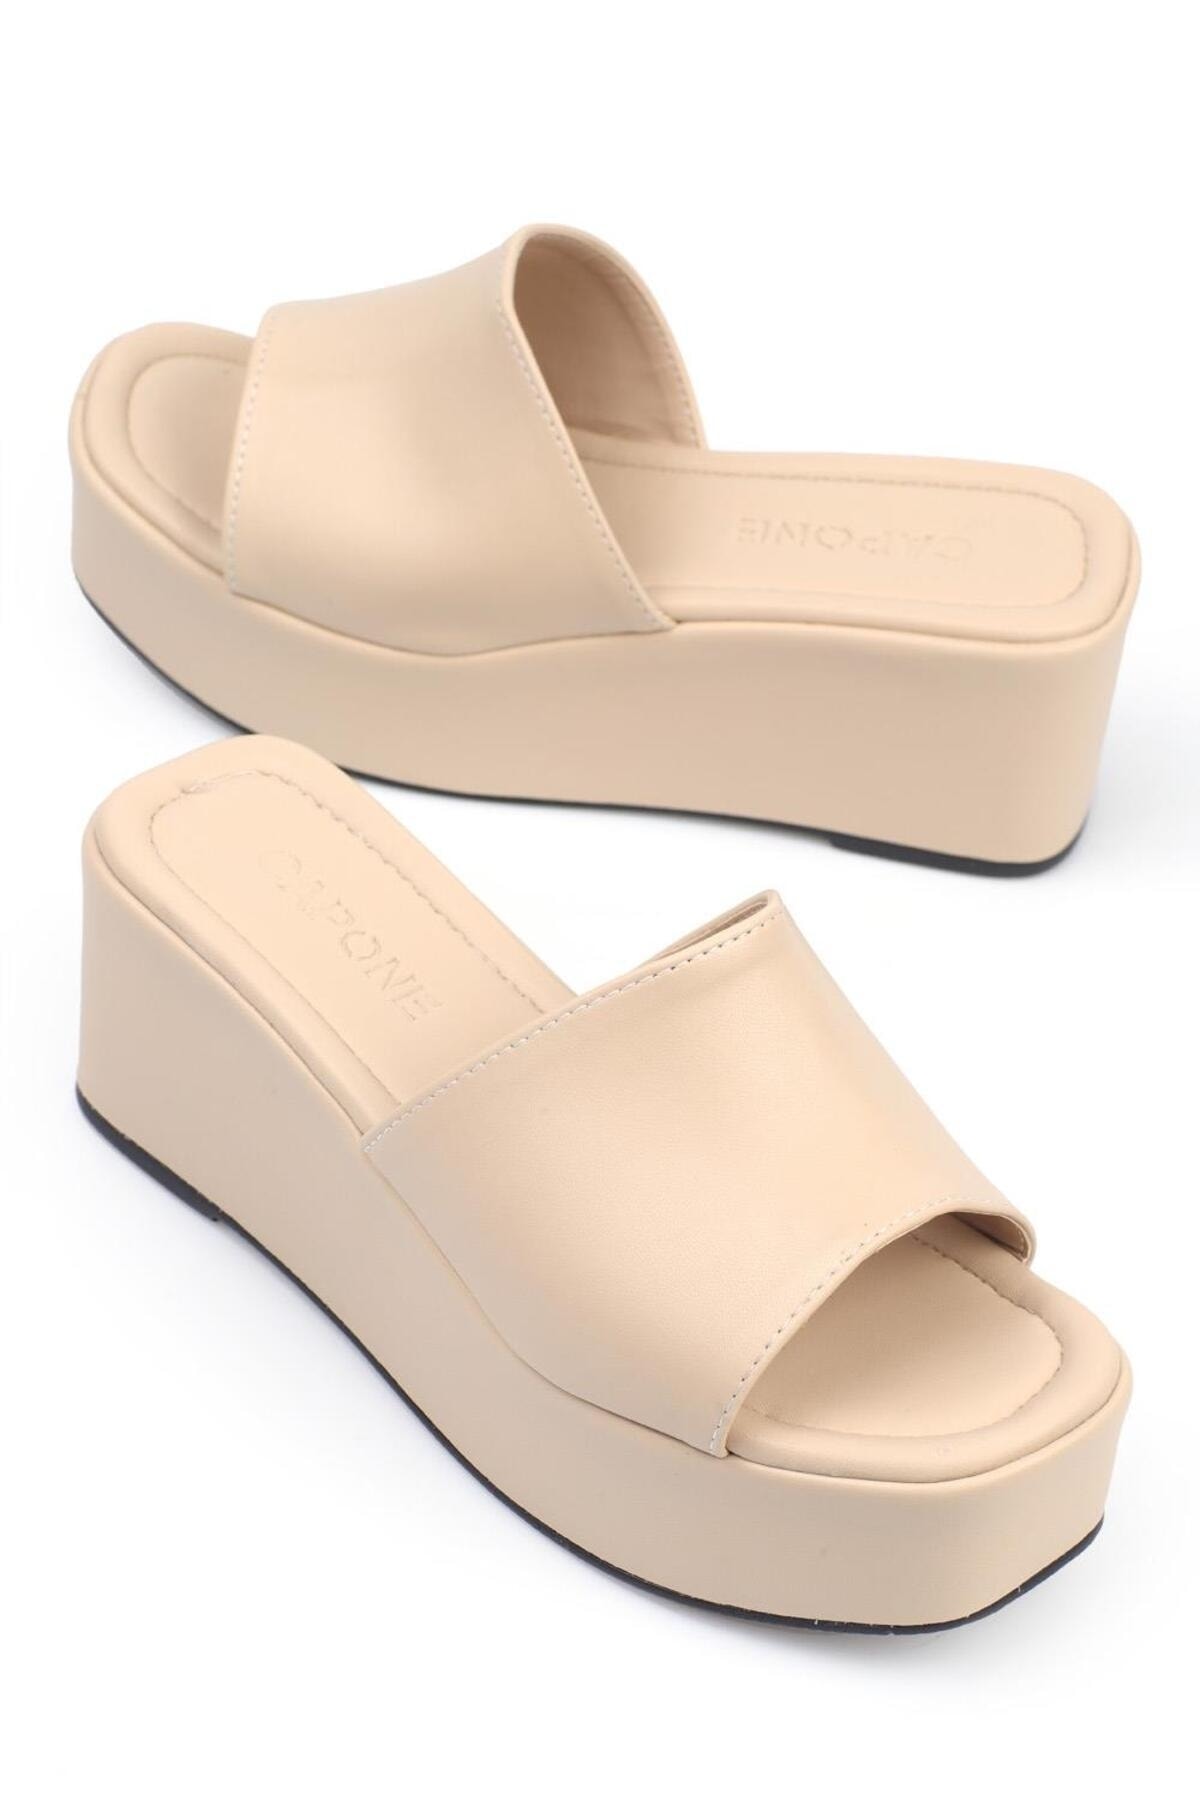 Levně Capone Outfitters Capone Women's Beige Heels with Single Strap. Flatform Slippers.